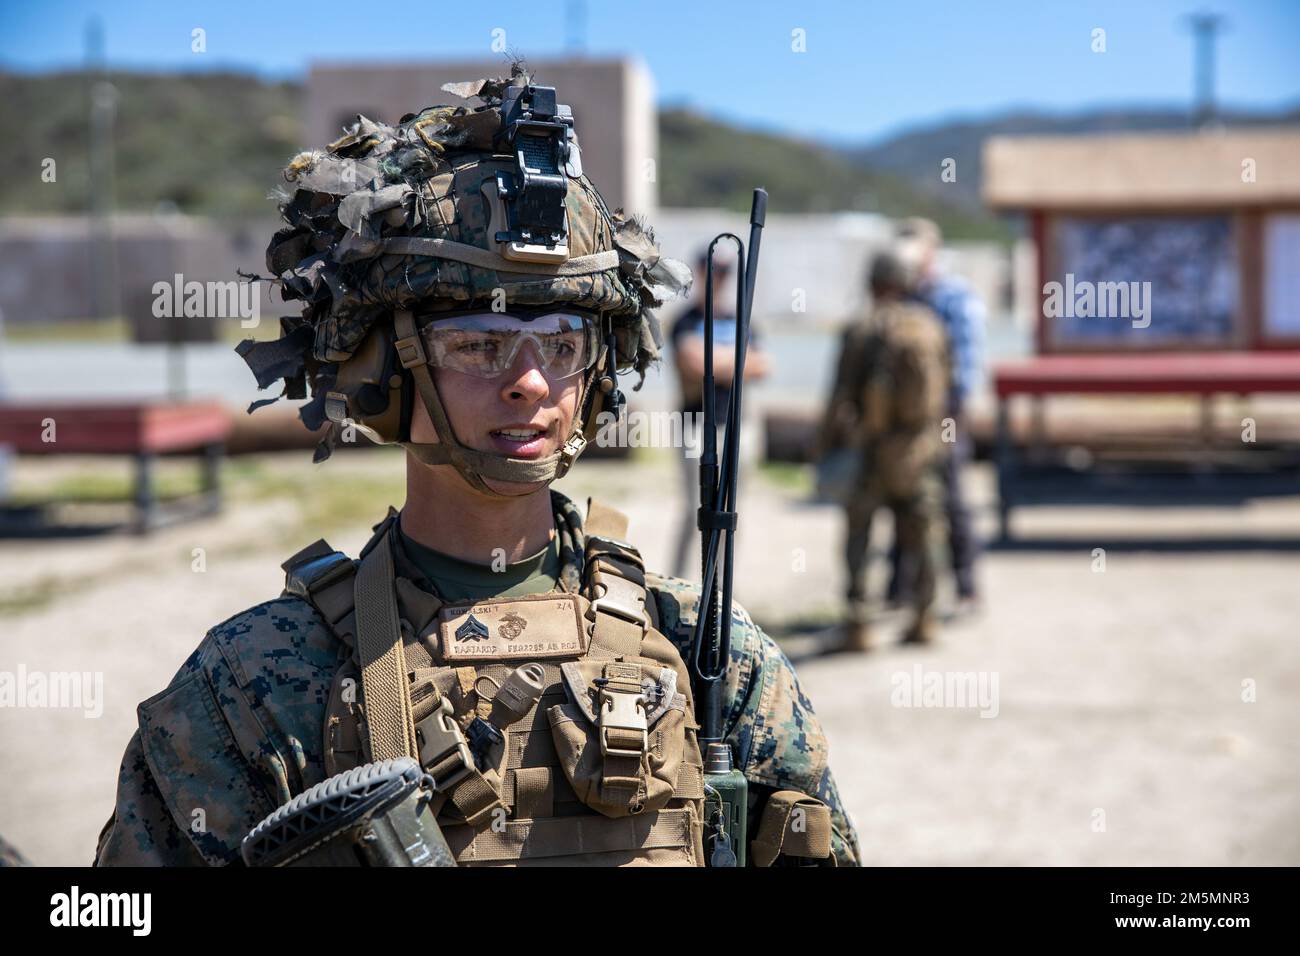 U.S. Marine Corps Cpl. Tyler Kowalski, a rifleman with Fox Company, 2nd Battalion, 4th Marines, 1st Marine Division prepares for a patrol in the Infantry Immersion Trainer during a I Marine Expeditionary Force Information Group Marine Corps Combat Readiness Evaluation exercise at Marine Corps Base Camp Pendleton, California, March 26, 2022. The purpose of the MCCRE is to formally evaluate the unit's core and/or assigned mission essential tasks in order to ensure service standardization and combat readiness. Stock Photo